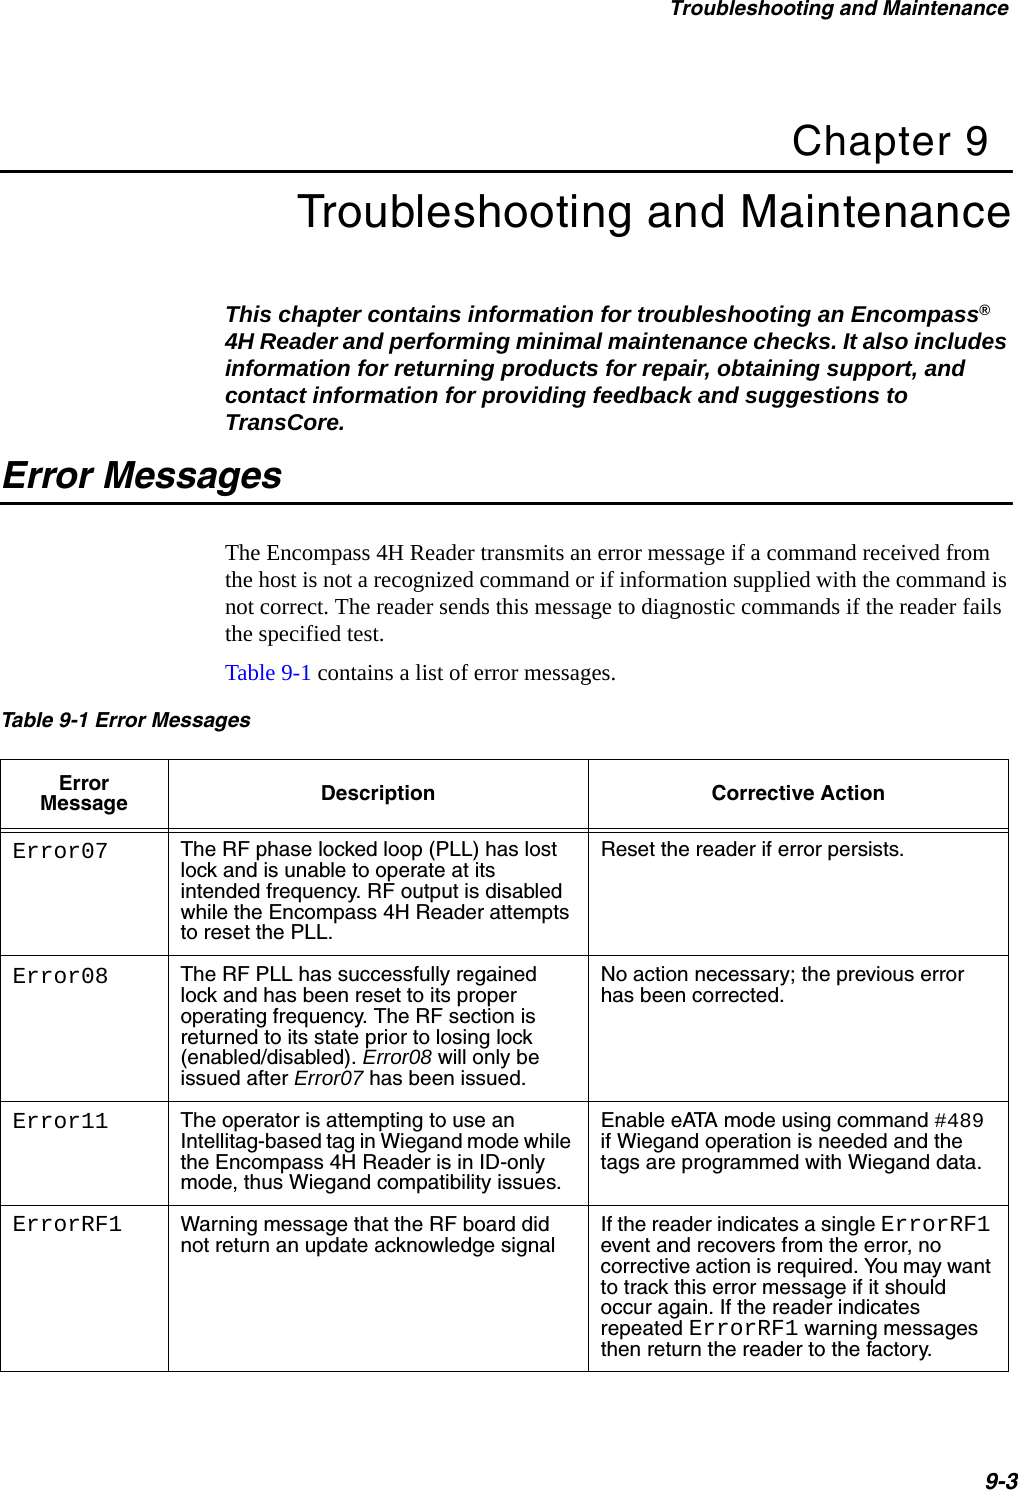 Troubleshooting and Maintenance9-3Chapter 9Troubleshooting and MaintenanceThis chapter contains information for troubleshooting an Encompass® 4H Reader and performing minimal maintenance checks. It also includes information for returning products for repair, obtaining support, and contact information for providing feedback and suggestions to TransCore. Error MessagesThe Encompass 4H Reader transmits an error message if a command received from the host is not a recognized command or if information supplied with the command is not correct. The reader sends this message to diagnostic commands if the reader fails the specified test.Table 9-1 contains a list of error messages. Table 9-1 Error Messages  Error Message Description Corrective ActionError07 The RF phase locked loop (PLL) has lost lock and is unable to operate at its intended frequency. RF output is disabled while the Encompass 4H Reader attempts to reset the PLL.Reset the reader if error persists.Error08 The RF PLL has successfully regained lock and has been reset to its proper operating frequency. The RF section is returned to its state prior to losing lock (enabled/disabled). Error08 will only be issued after Error07 has been issued.No action necessary; the previous error has been corrected.Error11 The operator is attempting to use an Intellitag-based tag in Wiegand mode while the Encompass 4H Reader is in ID-only mode, thus Wiegand compatibility issues.Enable eATA mode using command #489 if Wiegand operation is needed and the tags are programmed with Wiegand data.ErrorRF1 Warning message that the RF board did not return an update acknowledge signalIf the reader indicates a single ErrorRF1 event and recovers from the error, no corrective action is required. You may want to track this error message if it should occur again. If the reader indicates repeated ErrorRF1 warning messages then return the reader to the factory.